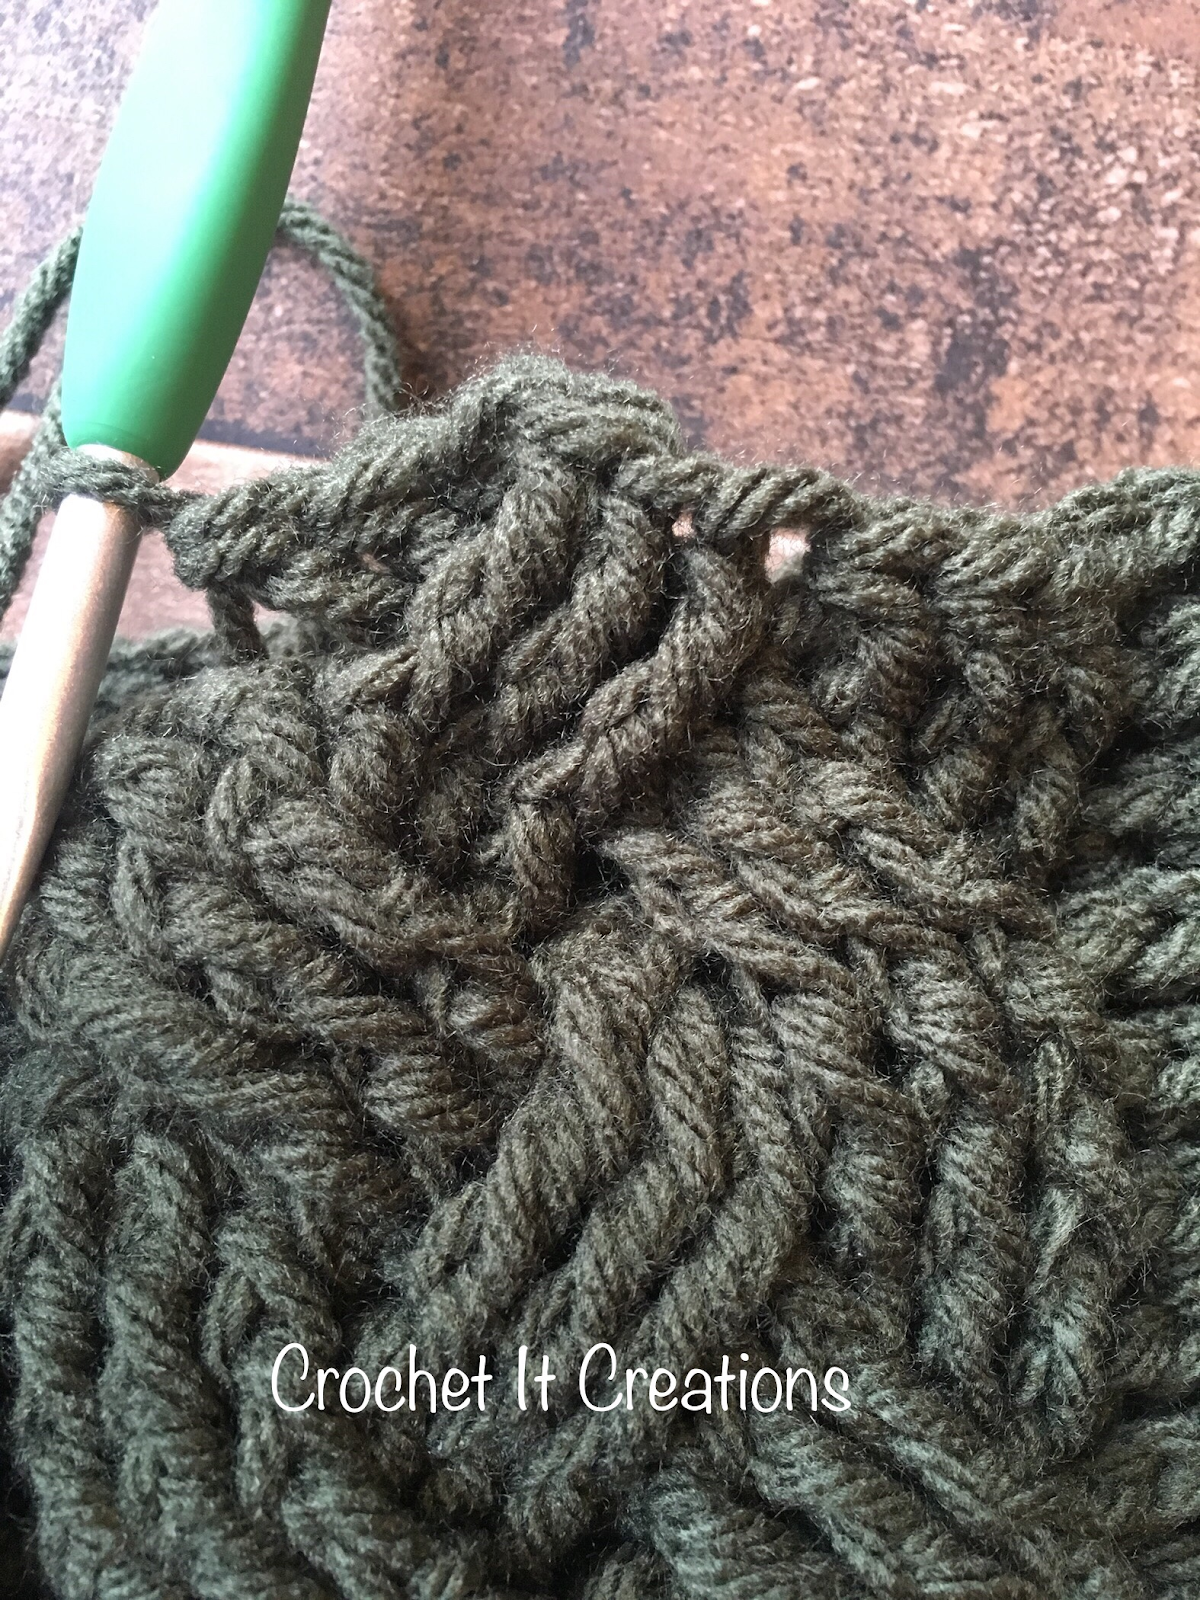 Braided Cable Crochet Stitches